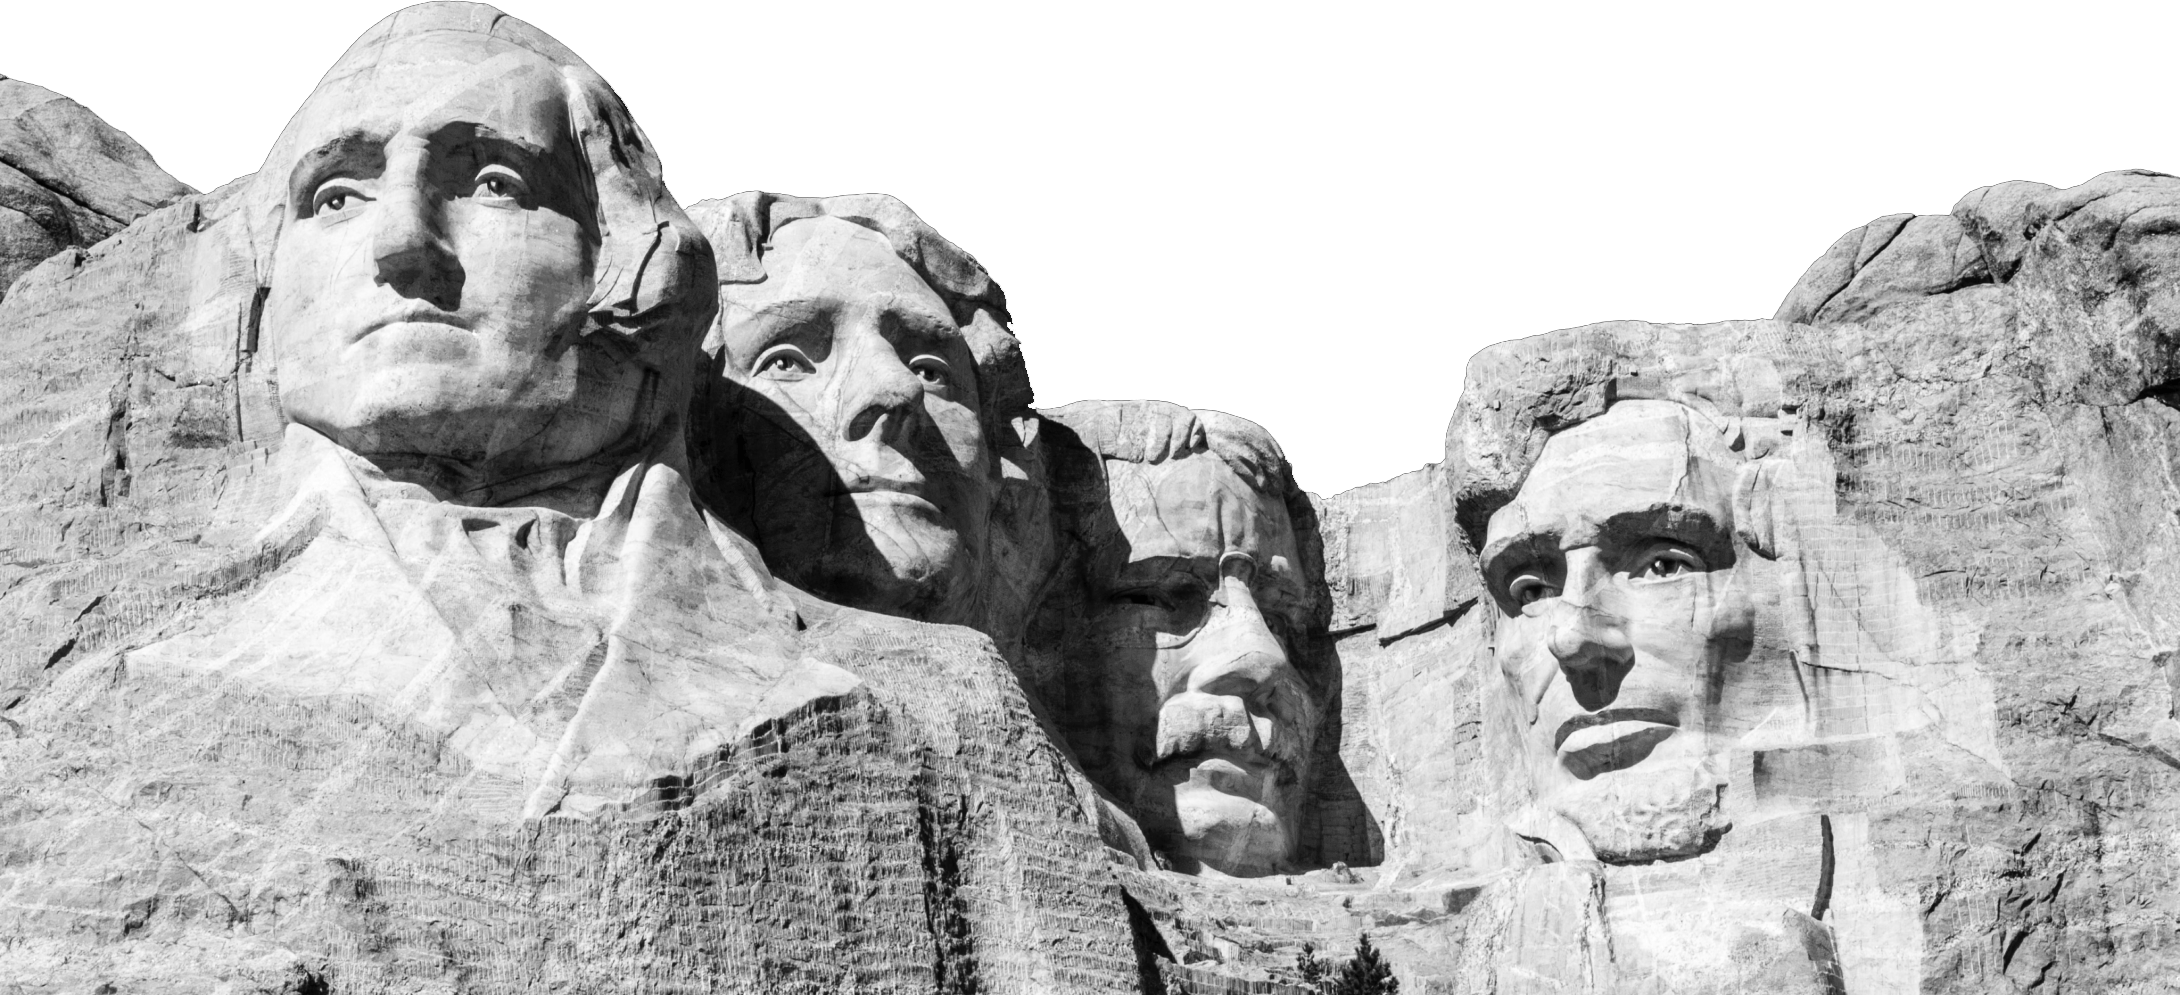 Black and white photograph of Mount Rushmore.